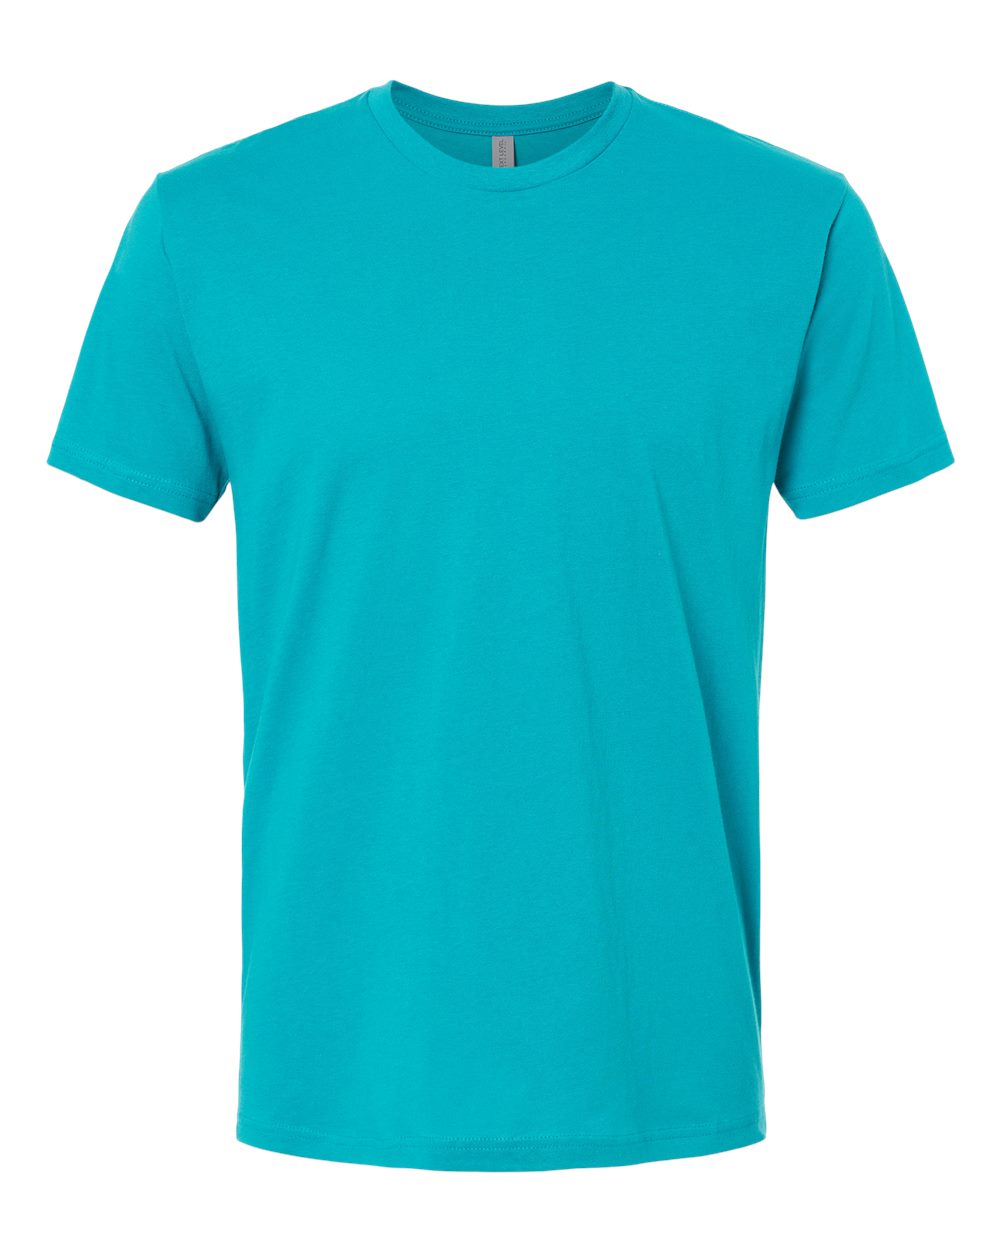 Next Level Cotton Tee (3600) in Teal